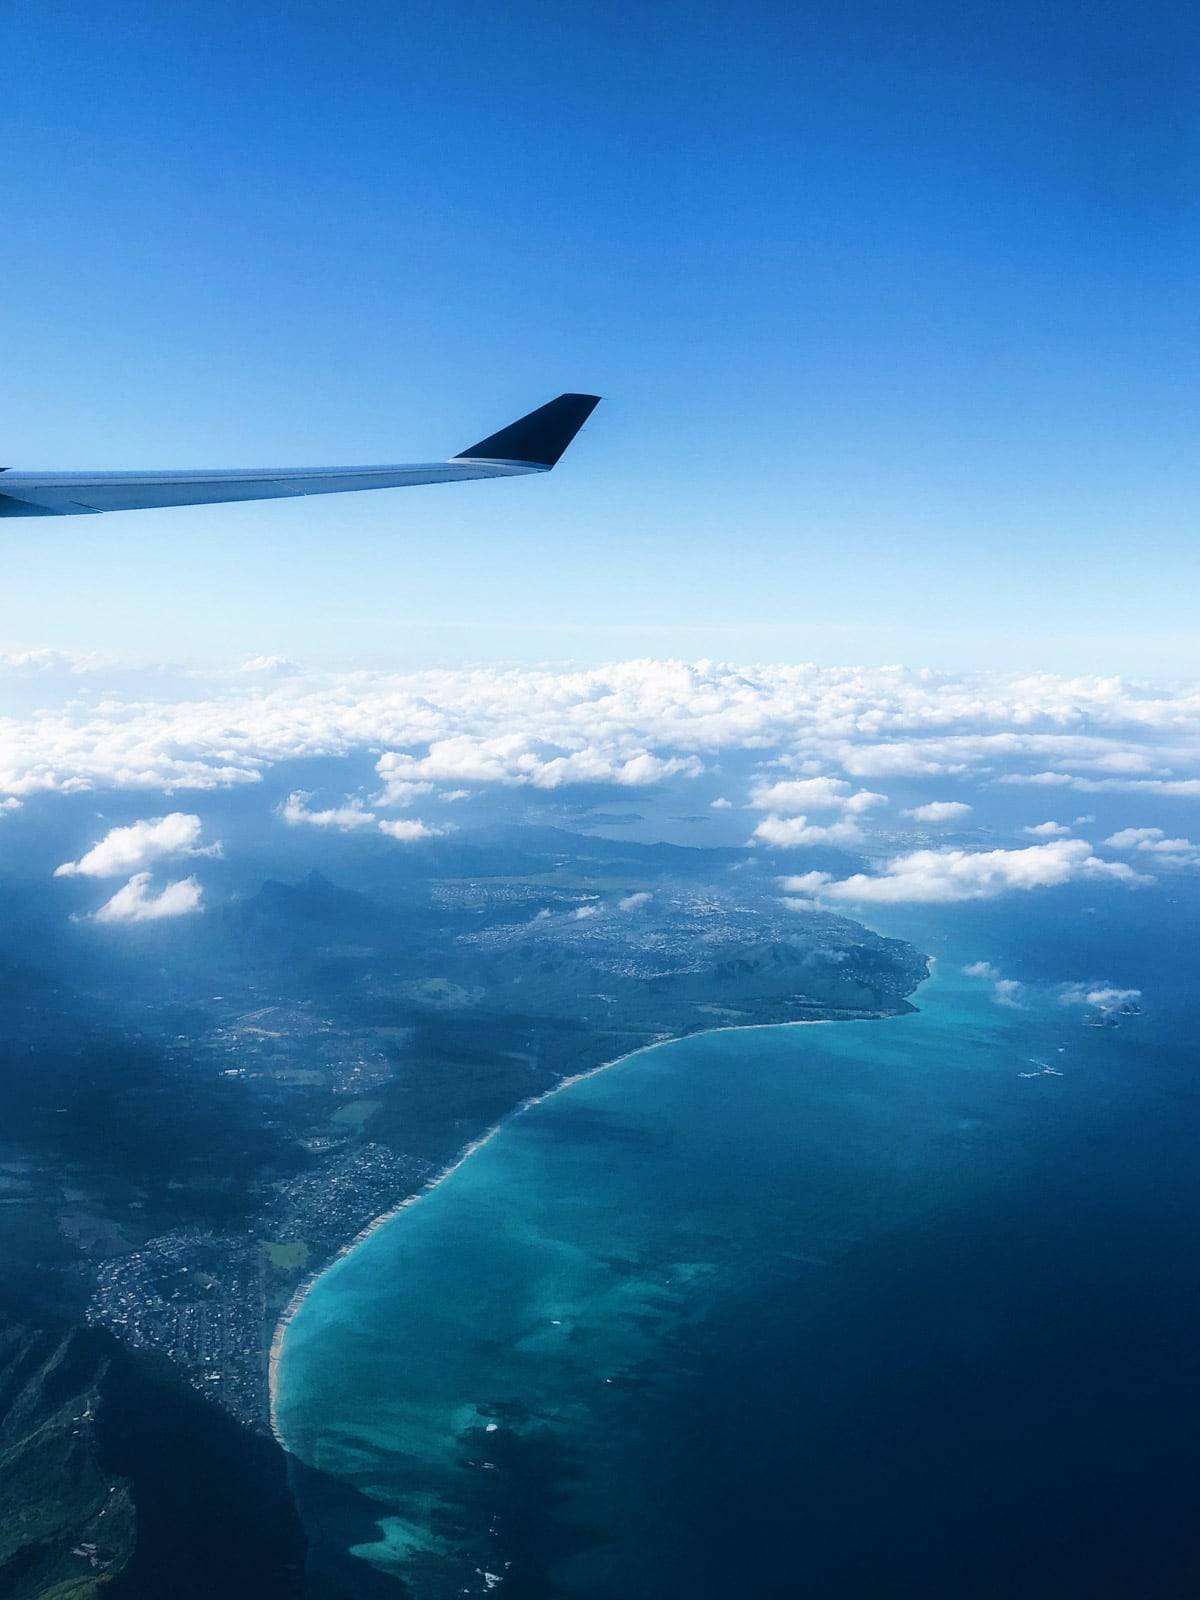 View of the ocean from an airplane.